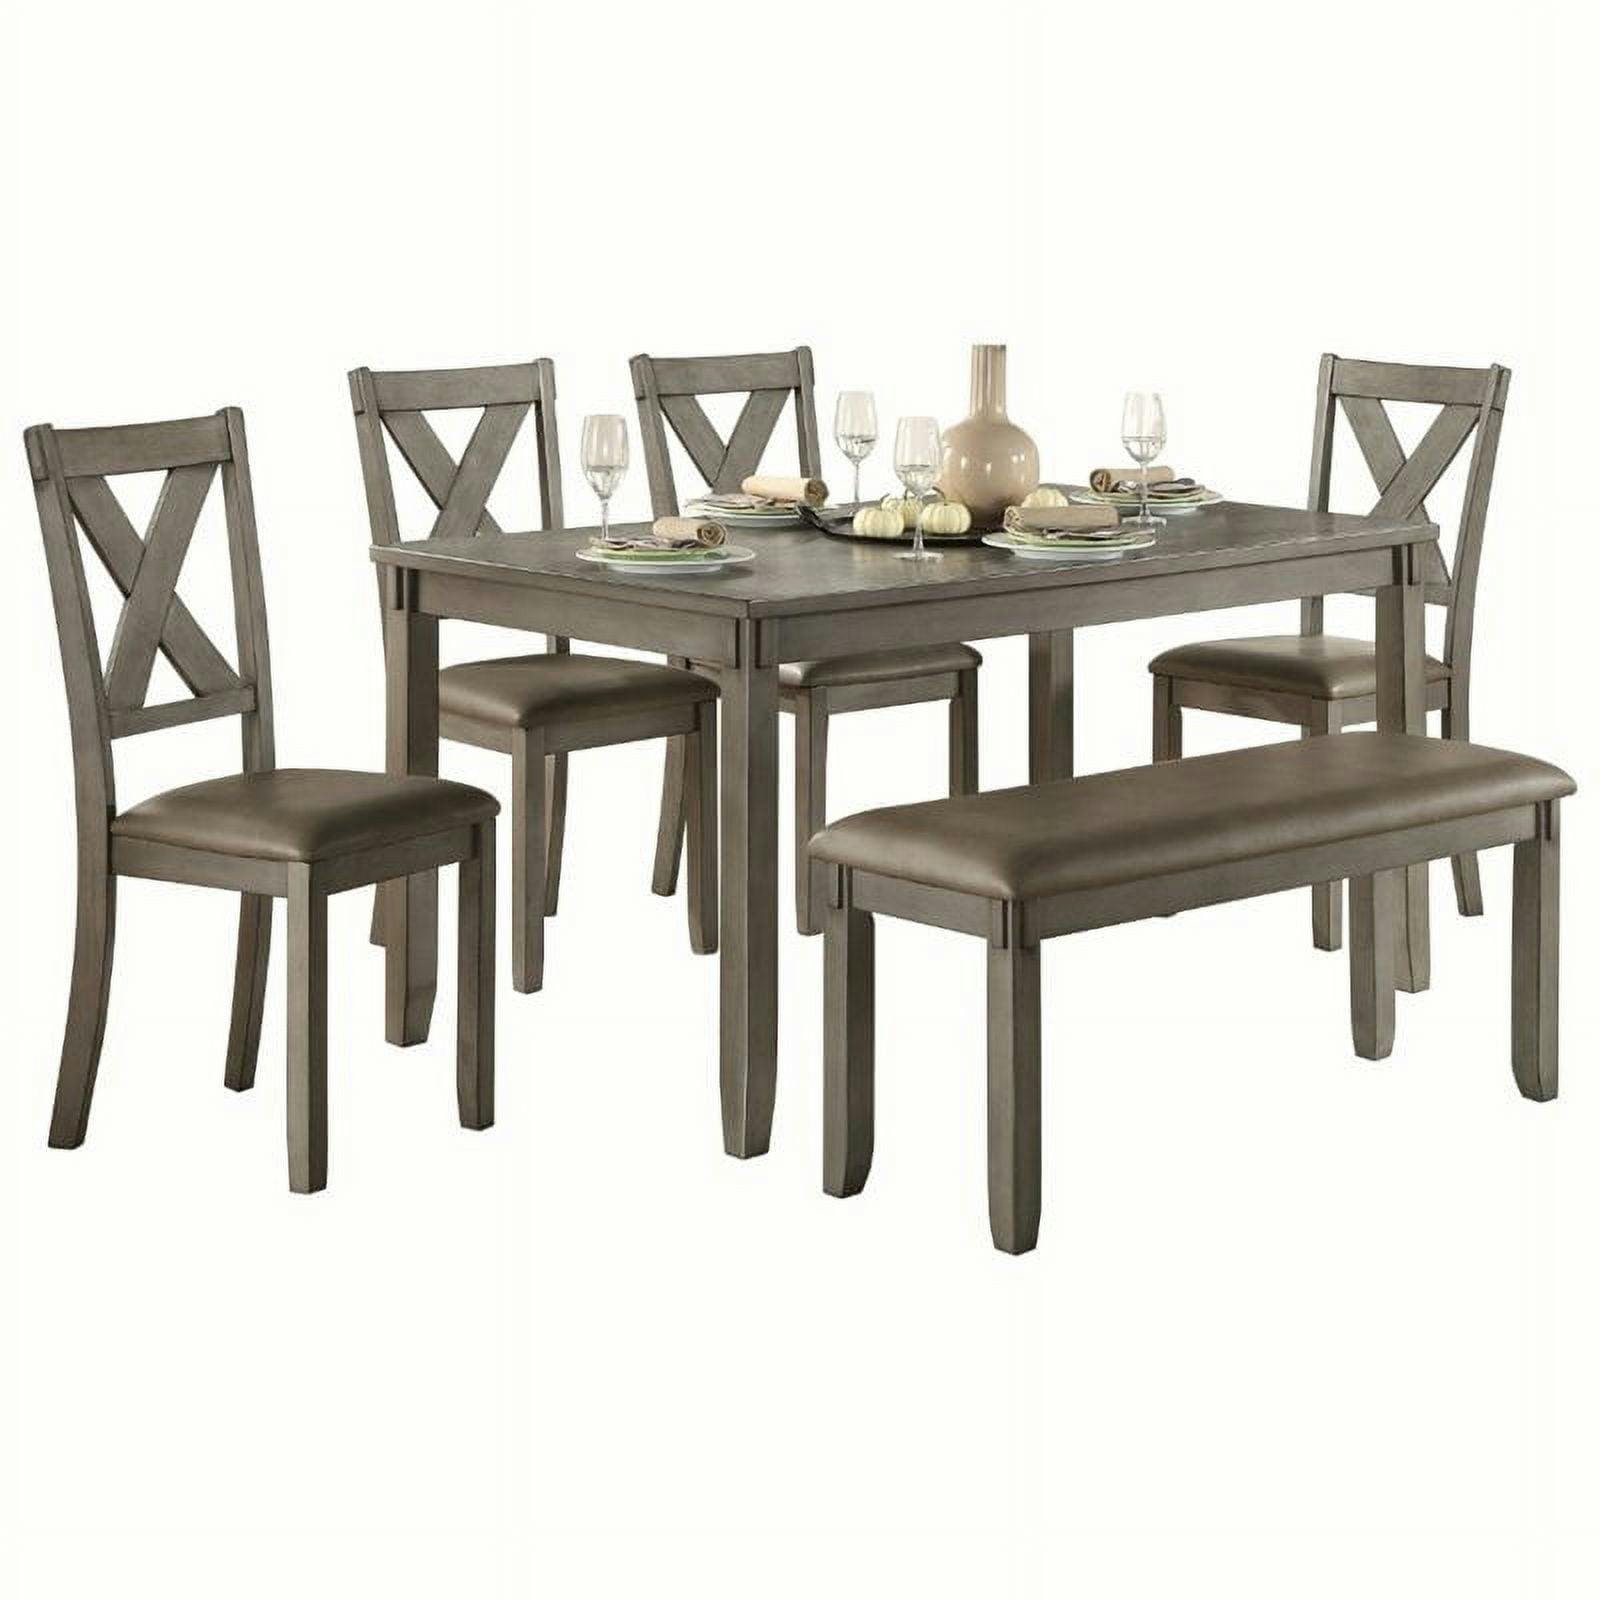 Transitional Gray 6-Piece Dining Set with Upholstered Chairs and Bench